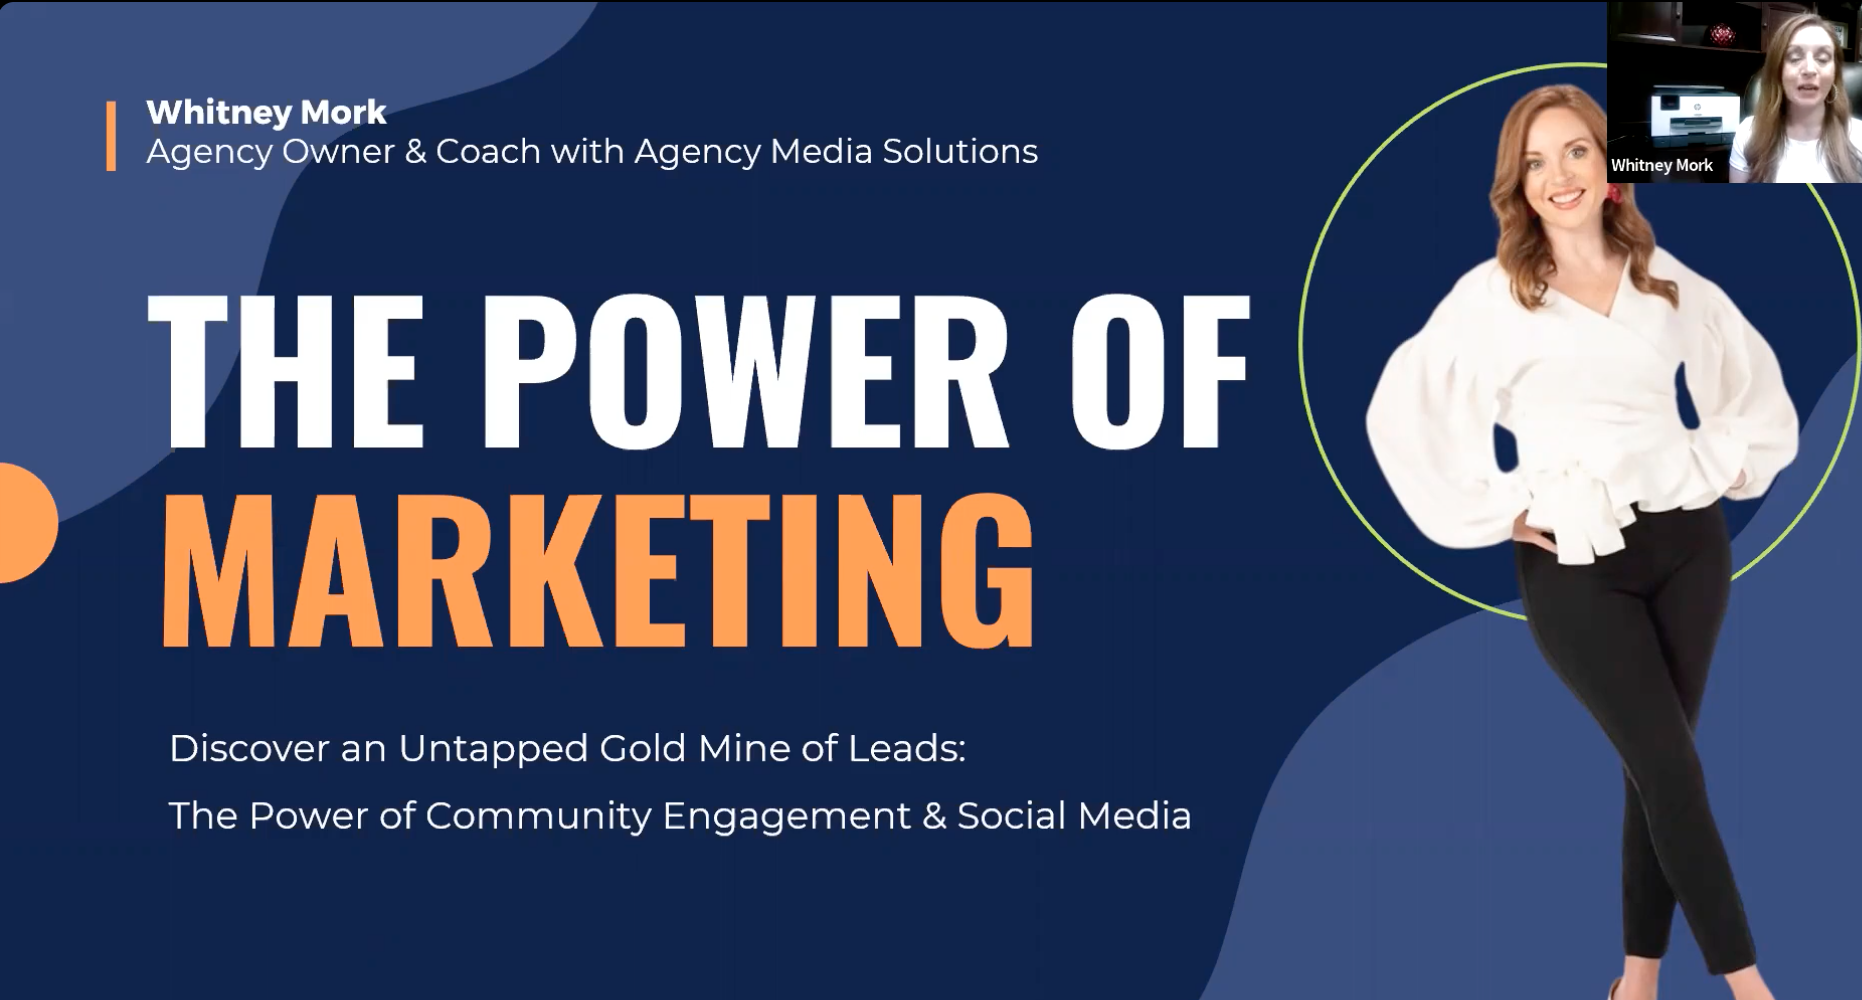 Discover an Untapped Gold Mine of Leads: The Power of Community Engagement with Whitney Mork